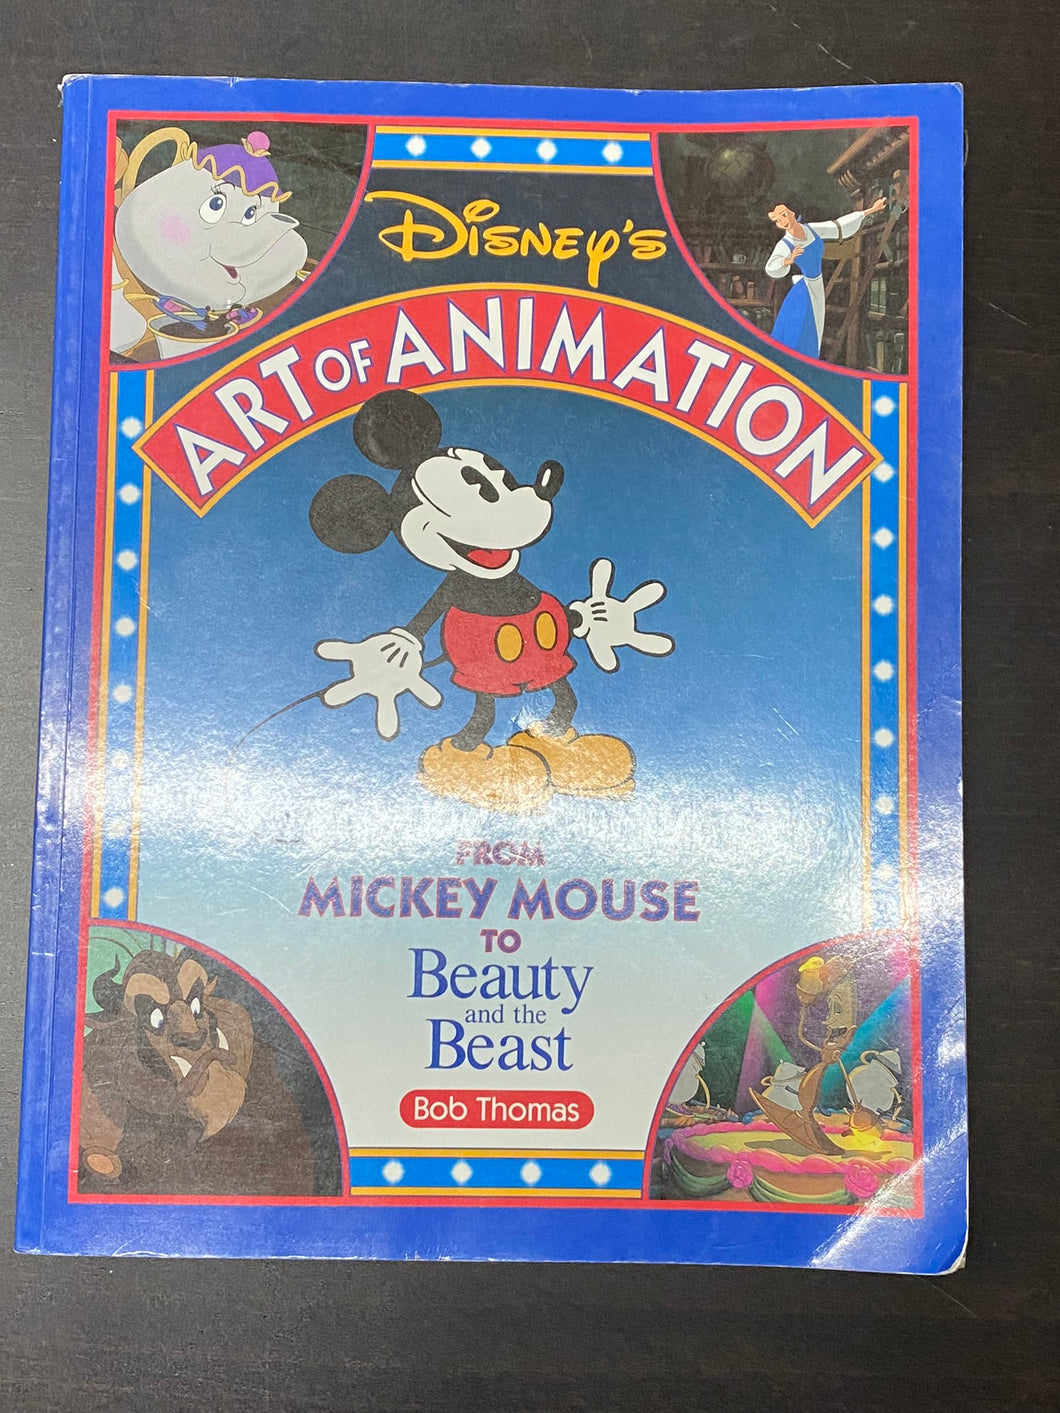 Disney's Art of Animation: From Mickey Mouse to Beauty and the Beast